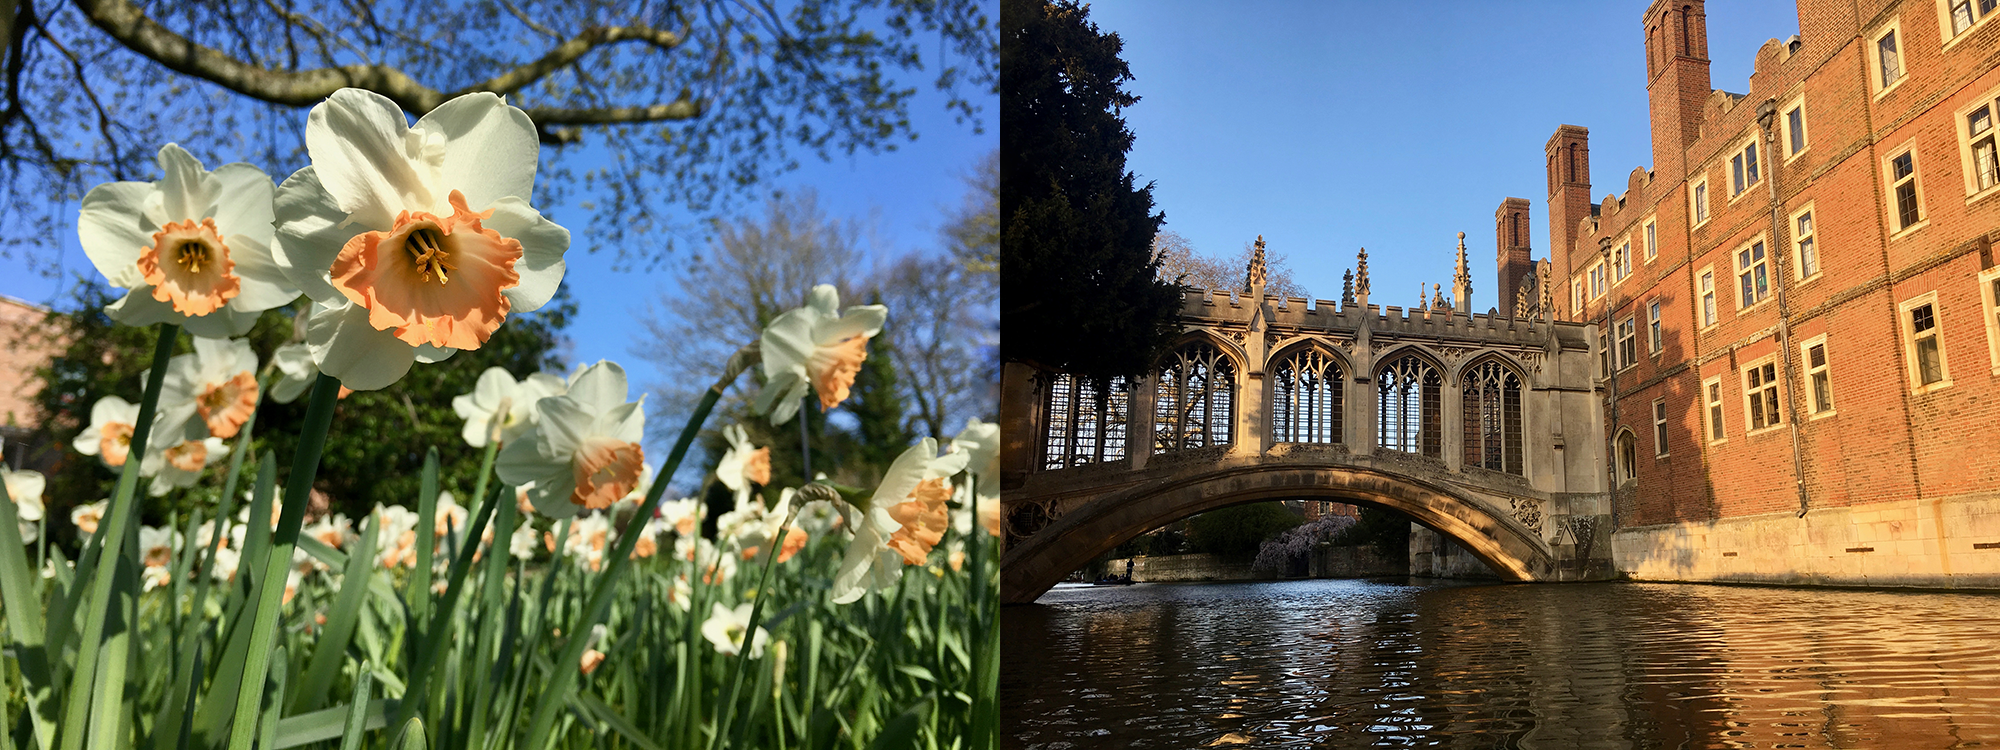 Left: daffodils in full bloom. Right: Bridge of Sighs as seen from the River Cam.